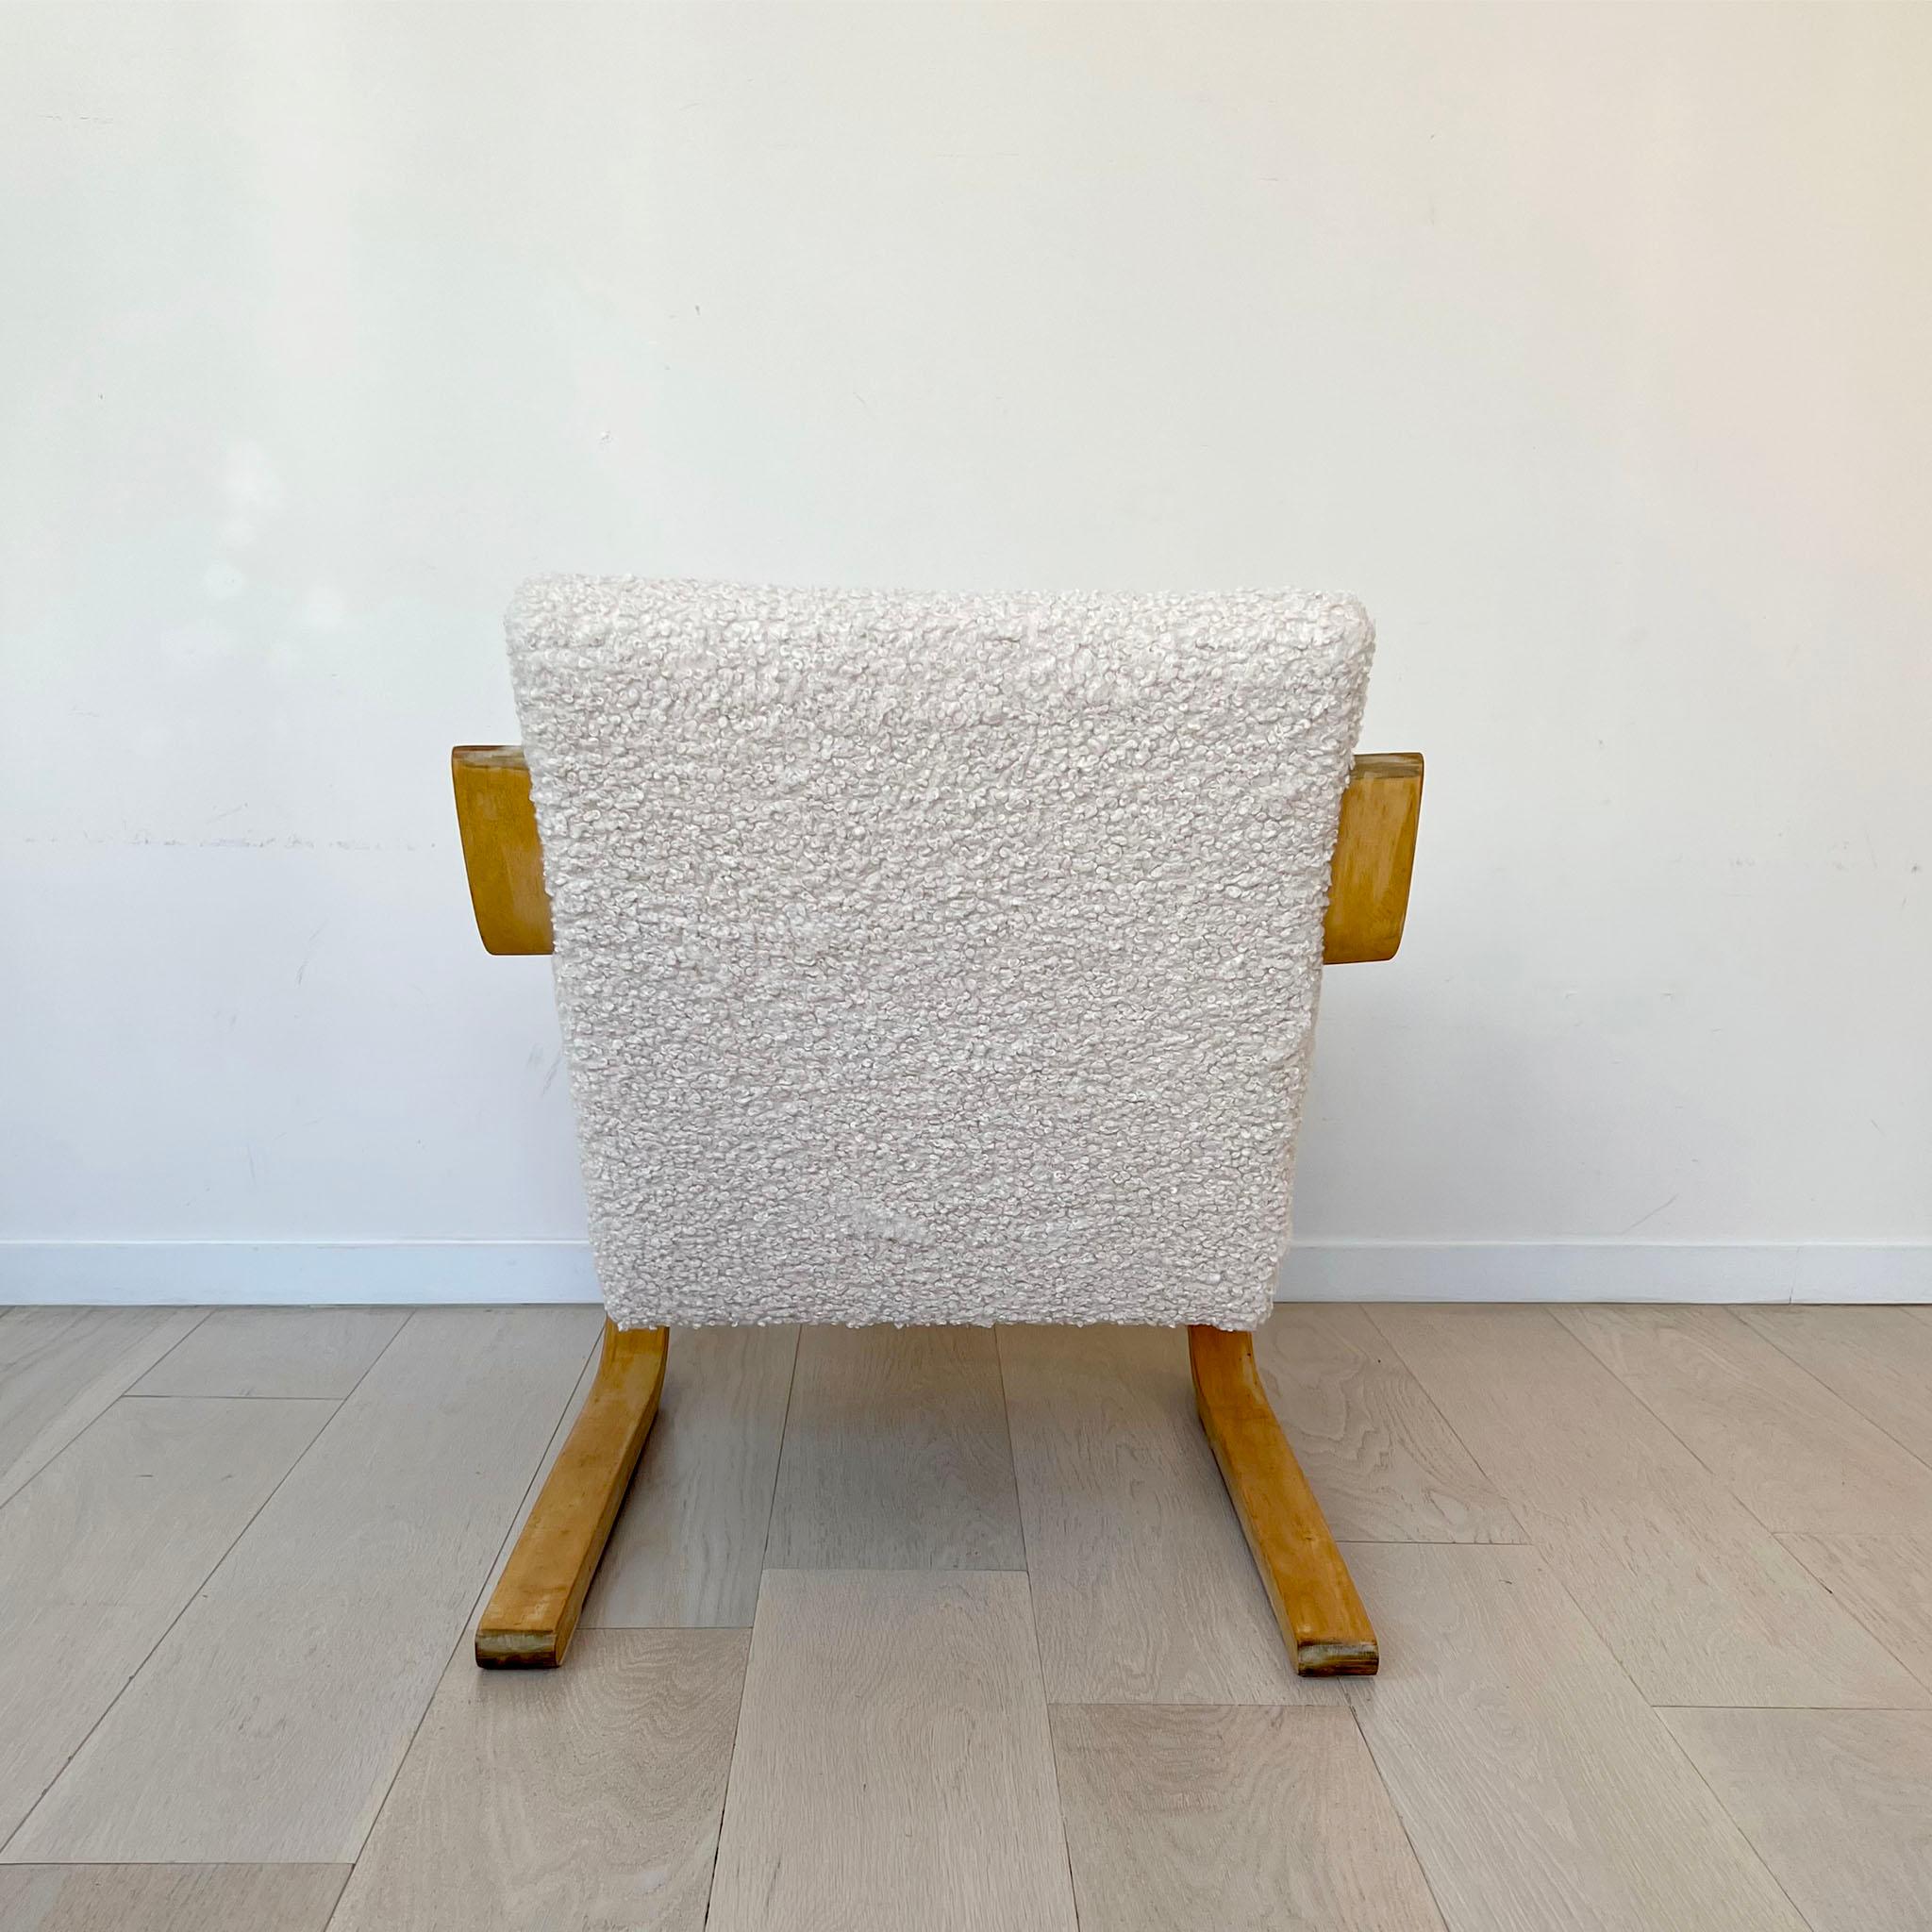 Swedish 1960s, Alvar Aalto Birch Bentwood Chair Upholstered in Fluffy Boucle Shearling